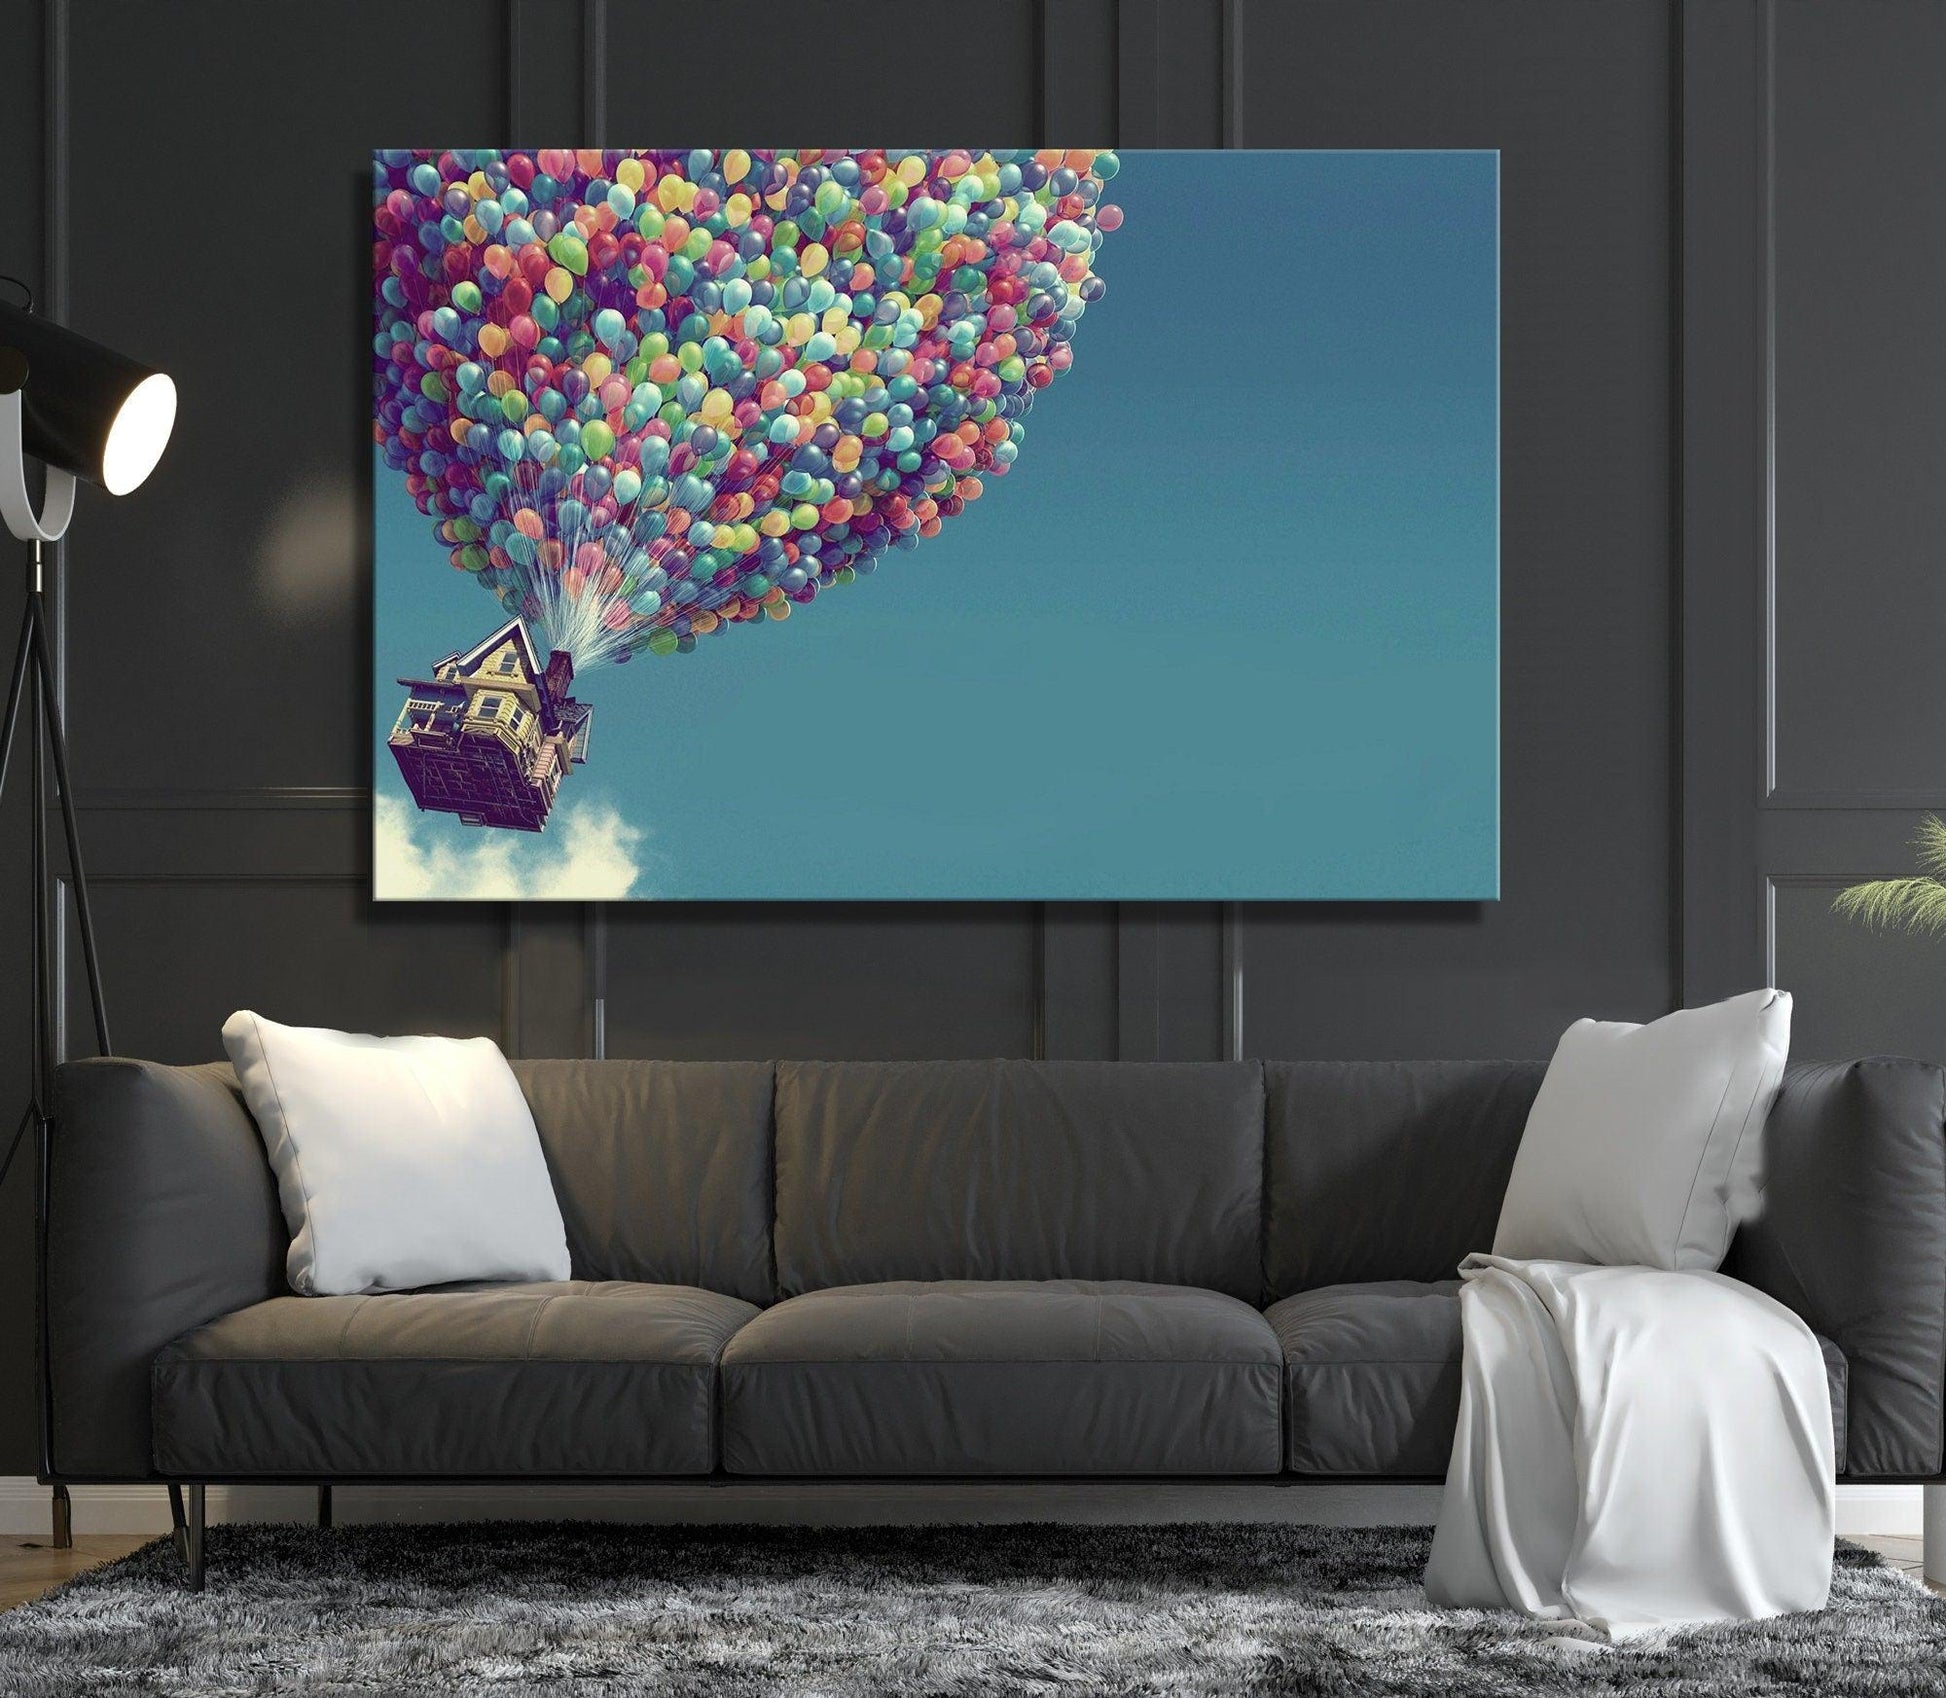 Pixar Wall Art| Up Pixar Canvas, Balloons canvas wall art, Kids Room Decor, Up Movie Wall Art, Colorful canvas, Up Poster, home decoration